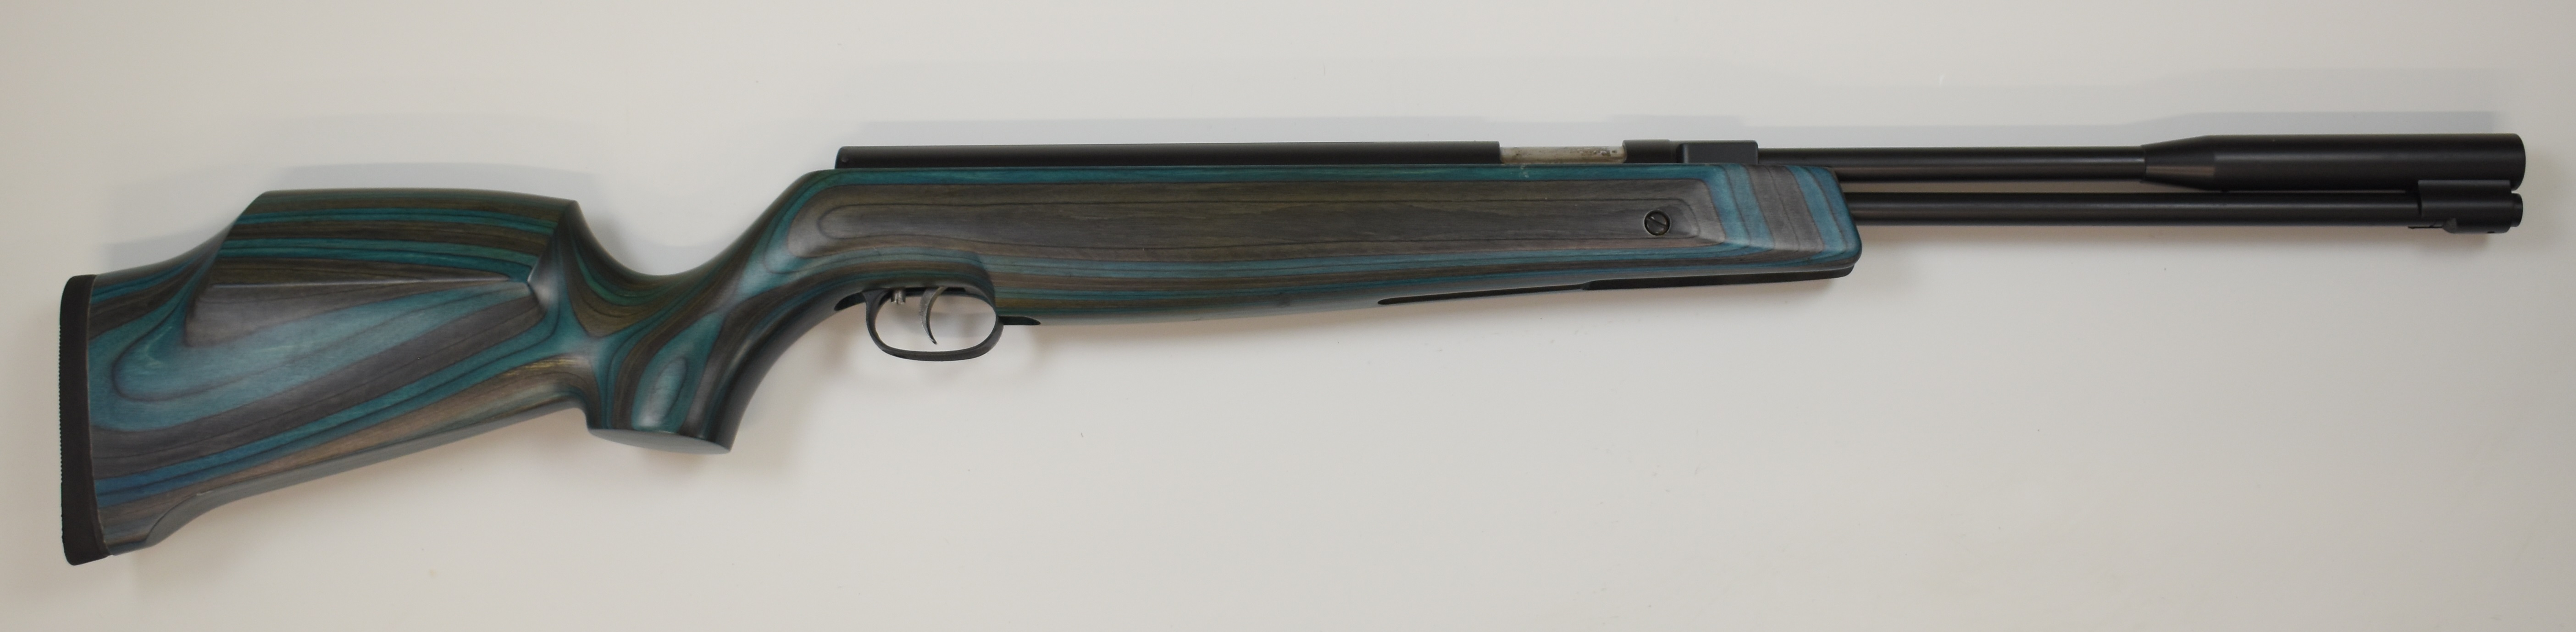 Weihrauch HW97K .177 underlever air rifle with blue laminated show wood stock, semi-pistol grip, - Image 3 of 10